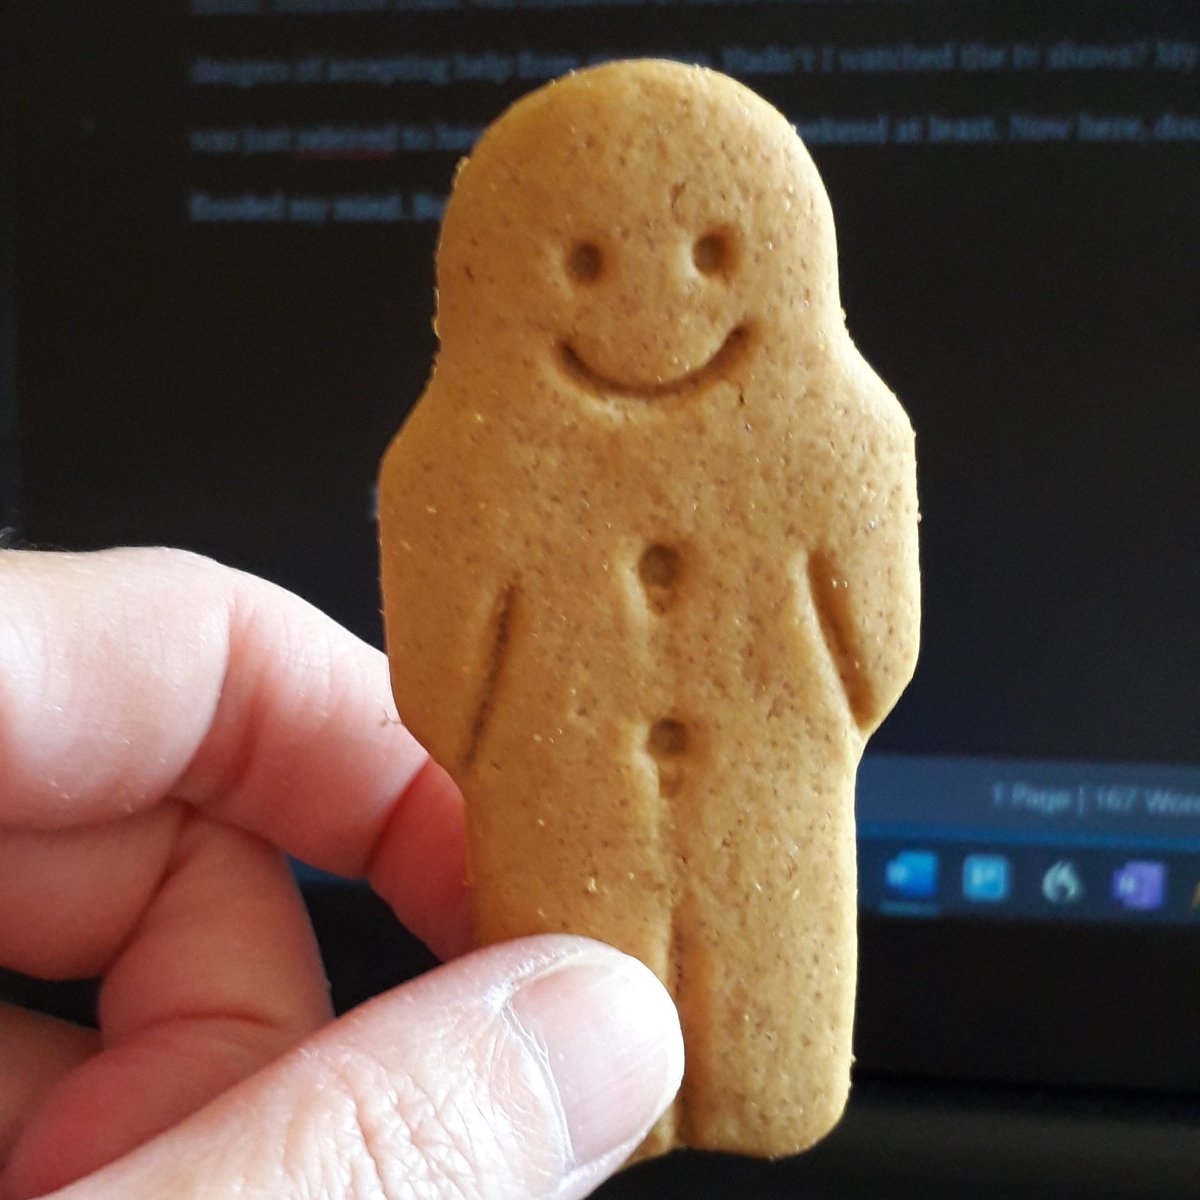 Christmas music is playing and eating gingerbread men to get into the festive mood for my new wip. Free writing and having no plan is making this a fun project that will probably never be seen. 
#amwriting #festive #gingerbread #writingresearch